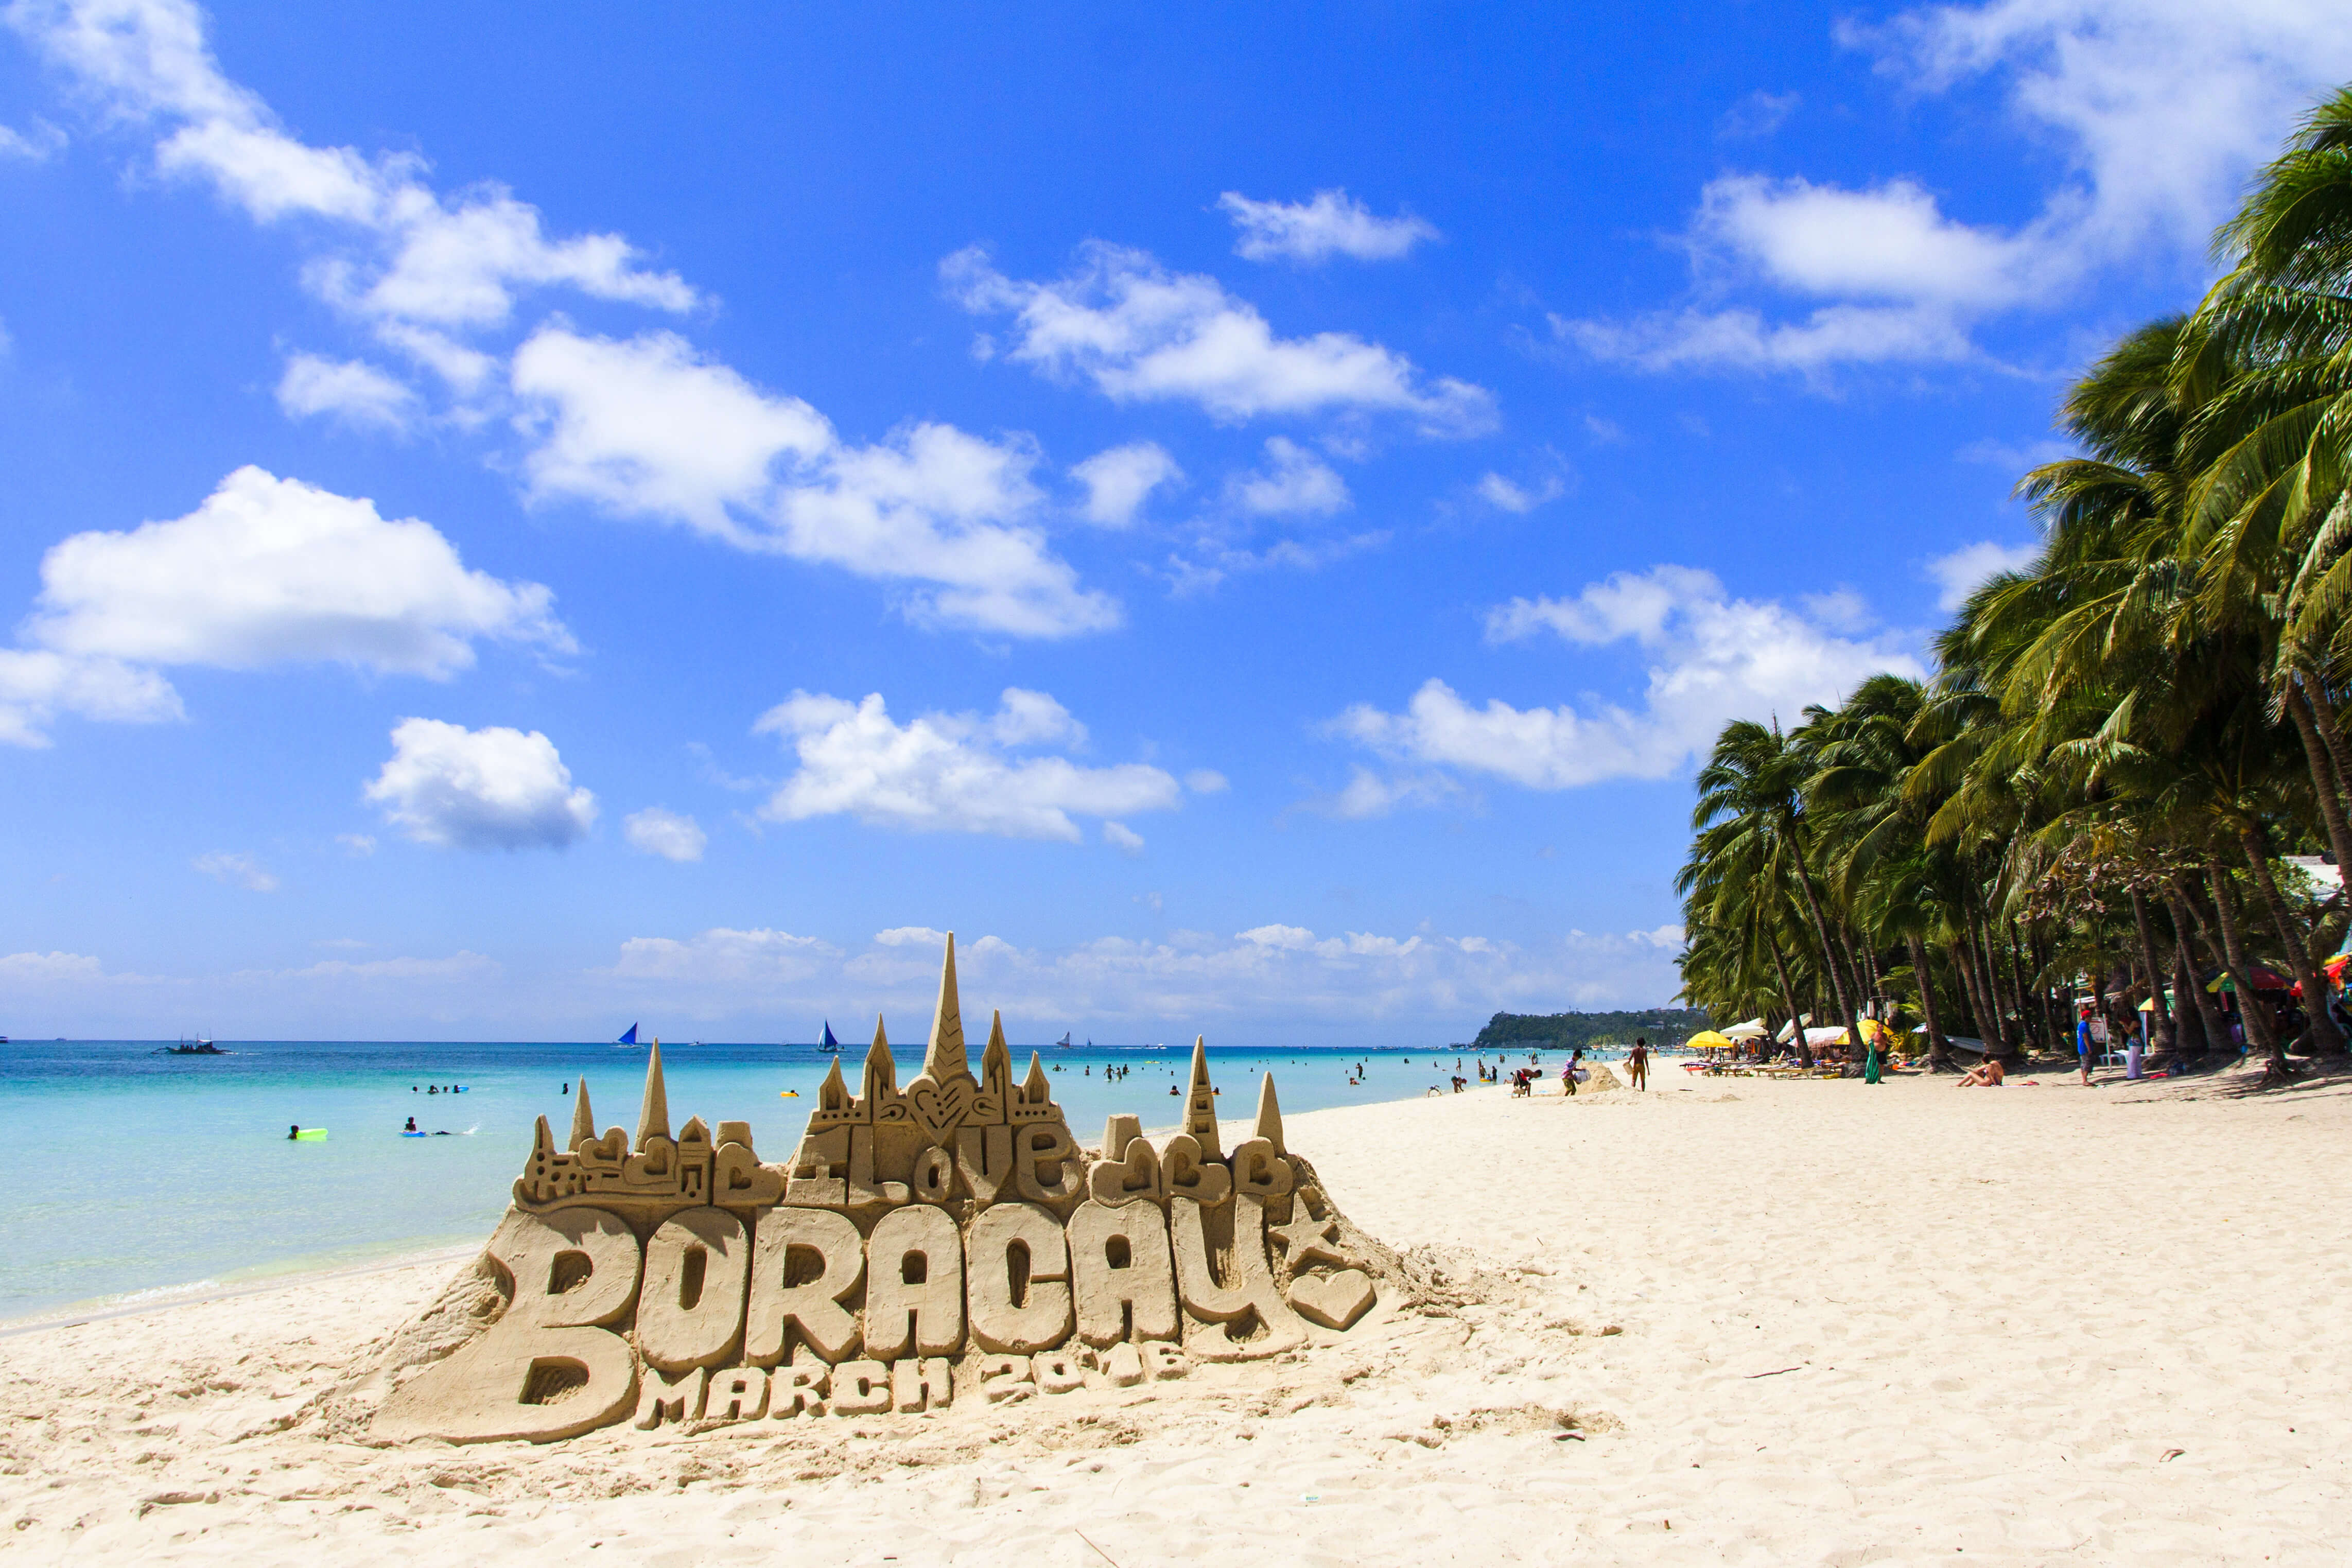 Boracay is a small tropical Island paradise located in the 